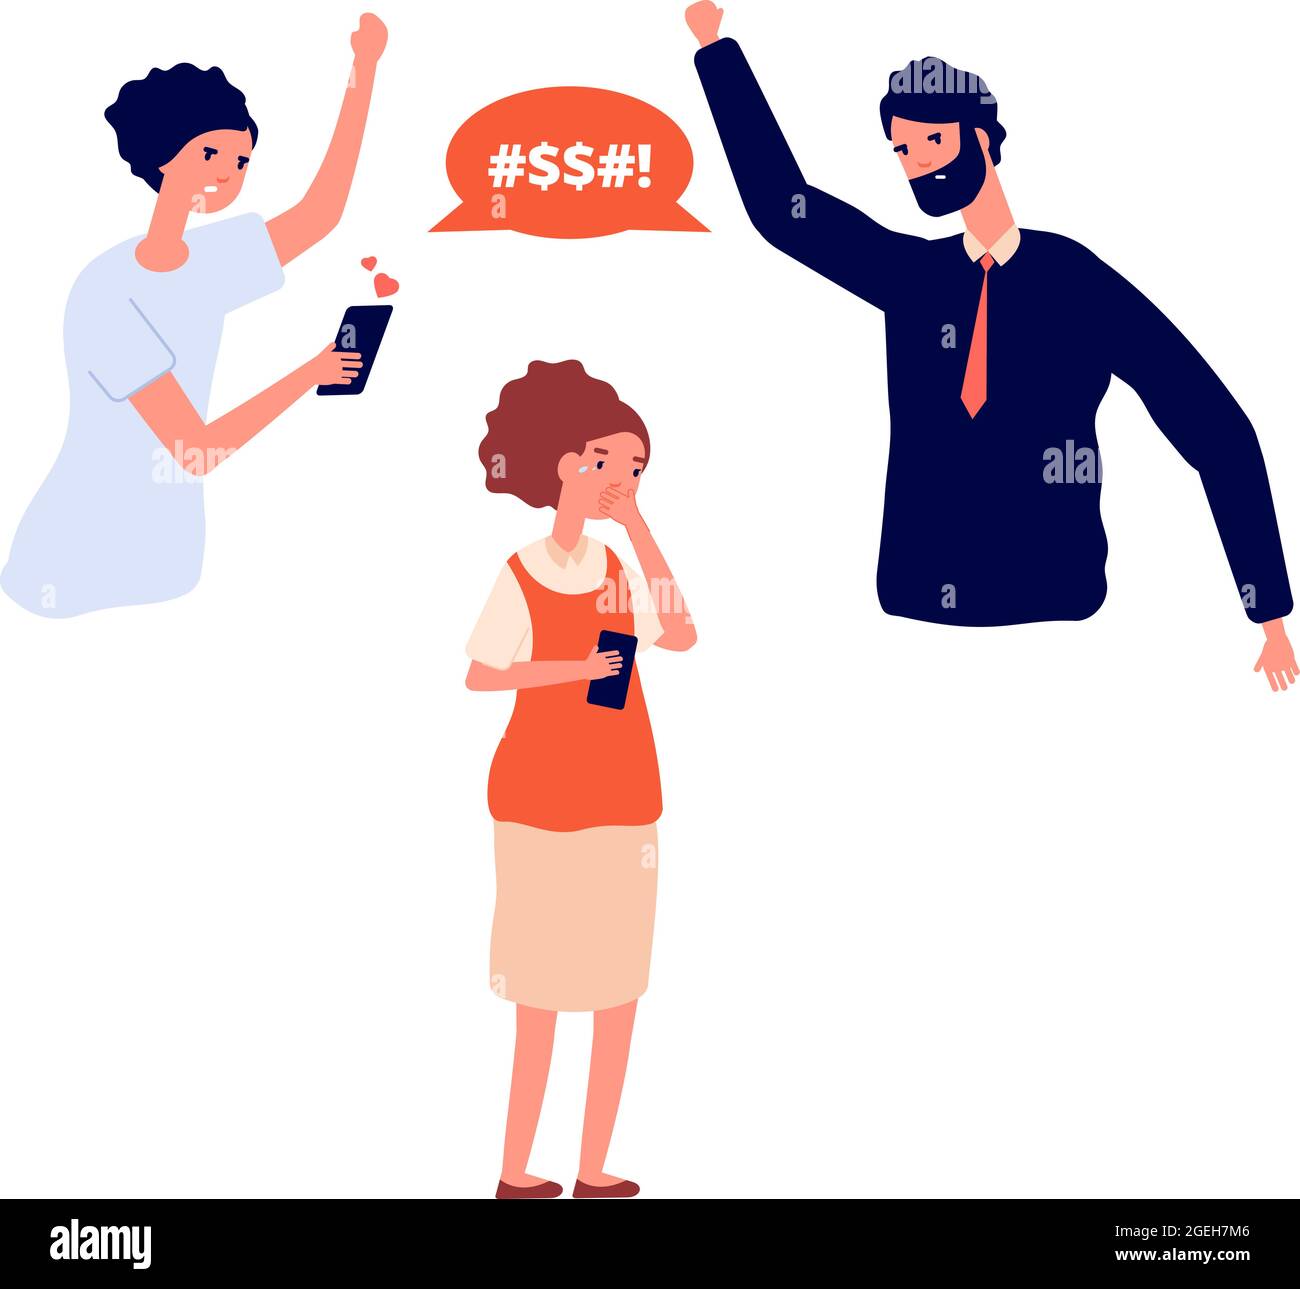 Domestic violence. Family bullying on child, parents swear at kid. Girl crying, mom and dad scream. Adult aggressive behavior, social problems vector Stock Vector